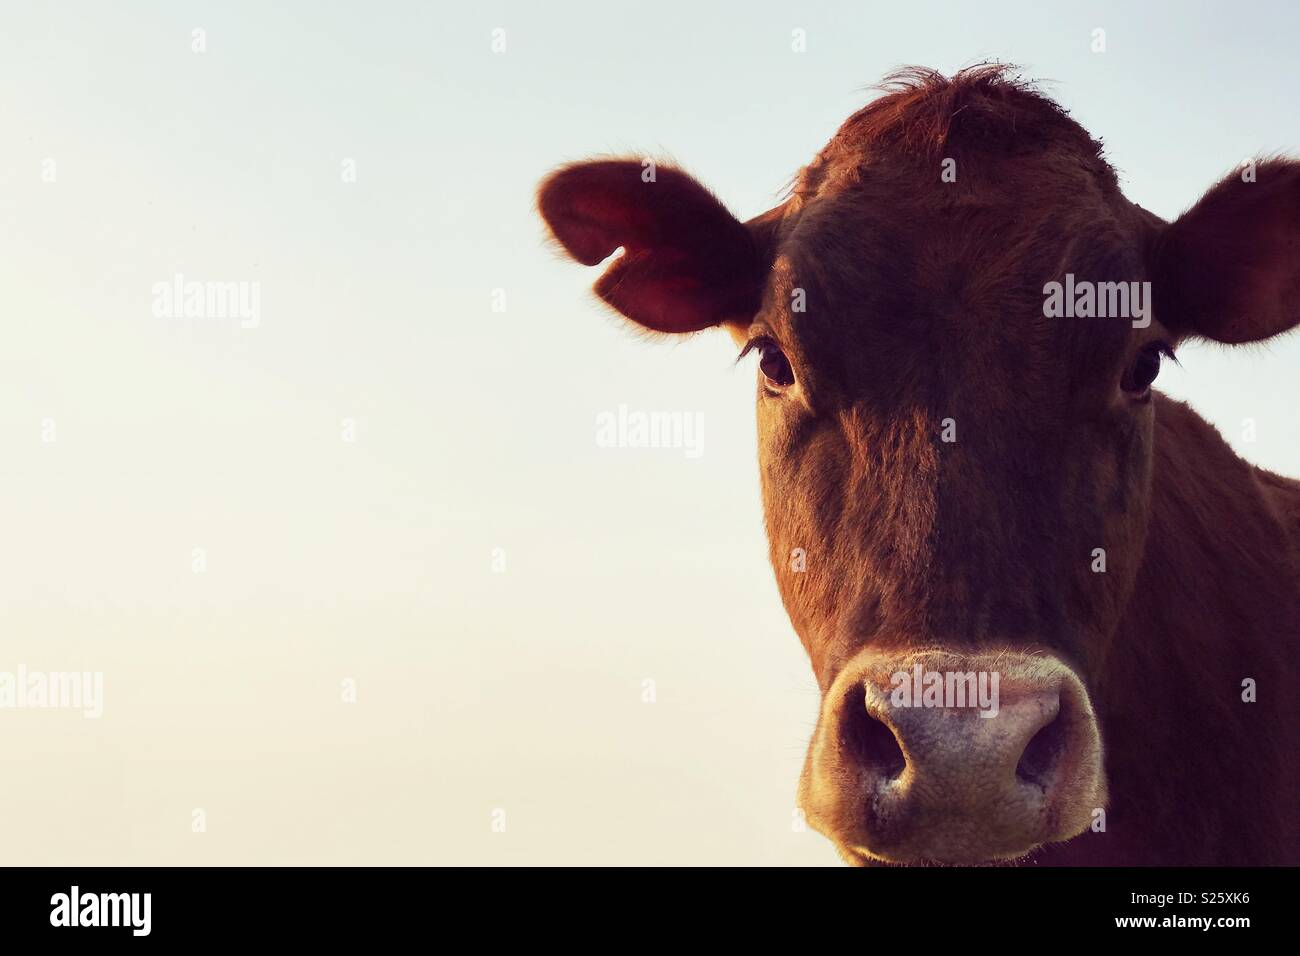 Closeup portrait of a young dairy cow looking calmly at camera. Stock Photo